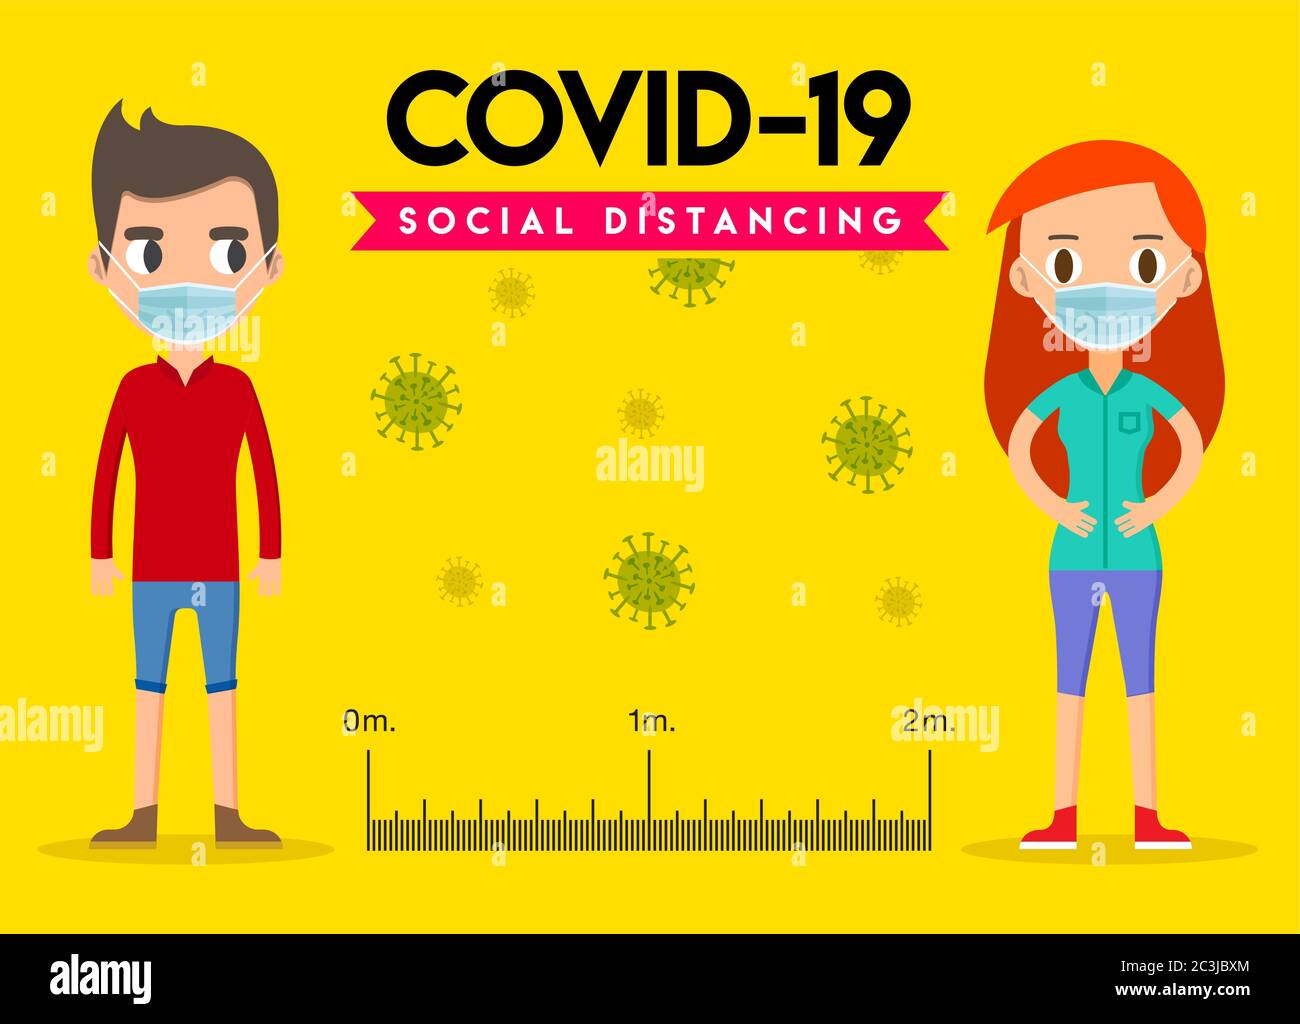 Social distancing, keep distance in public people society to protect from COVID-19. Coronavirus Outbreak. Stock Vector